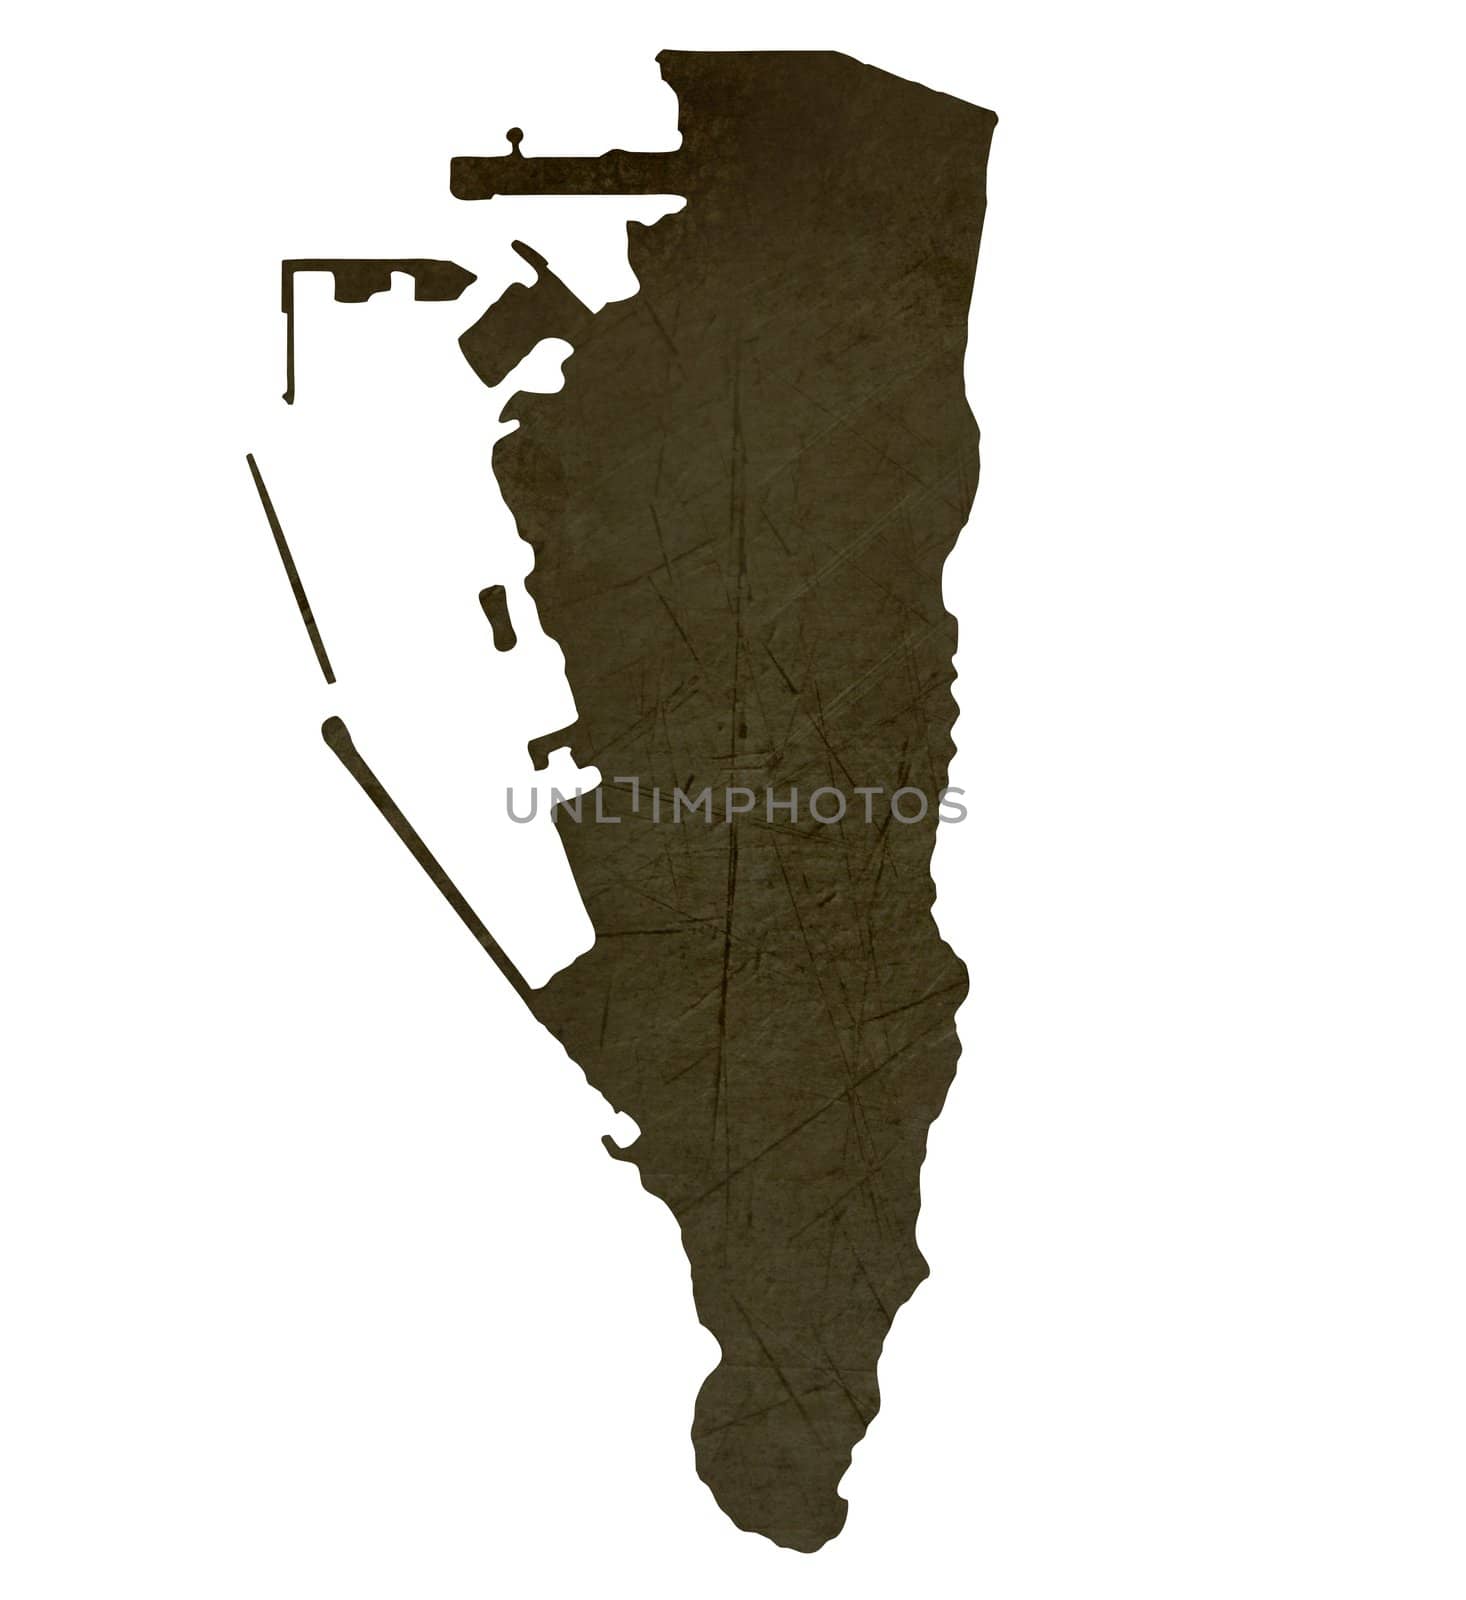 Dark silhouetted and textured map of Gibraltar isolated on white background.